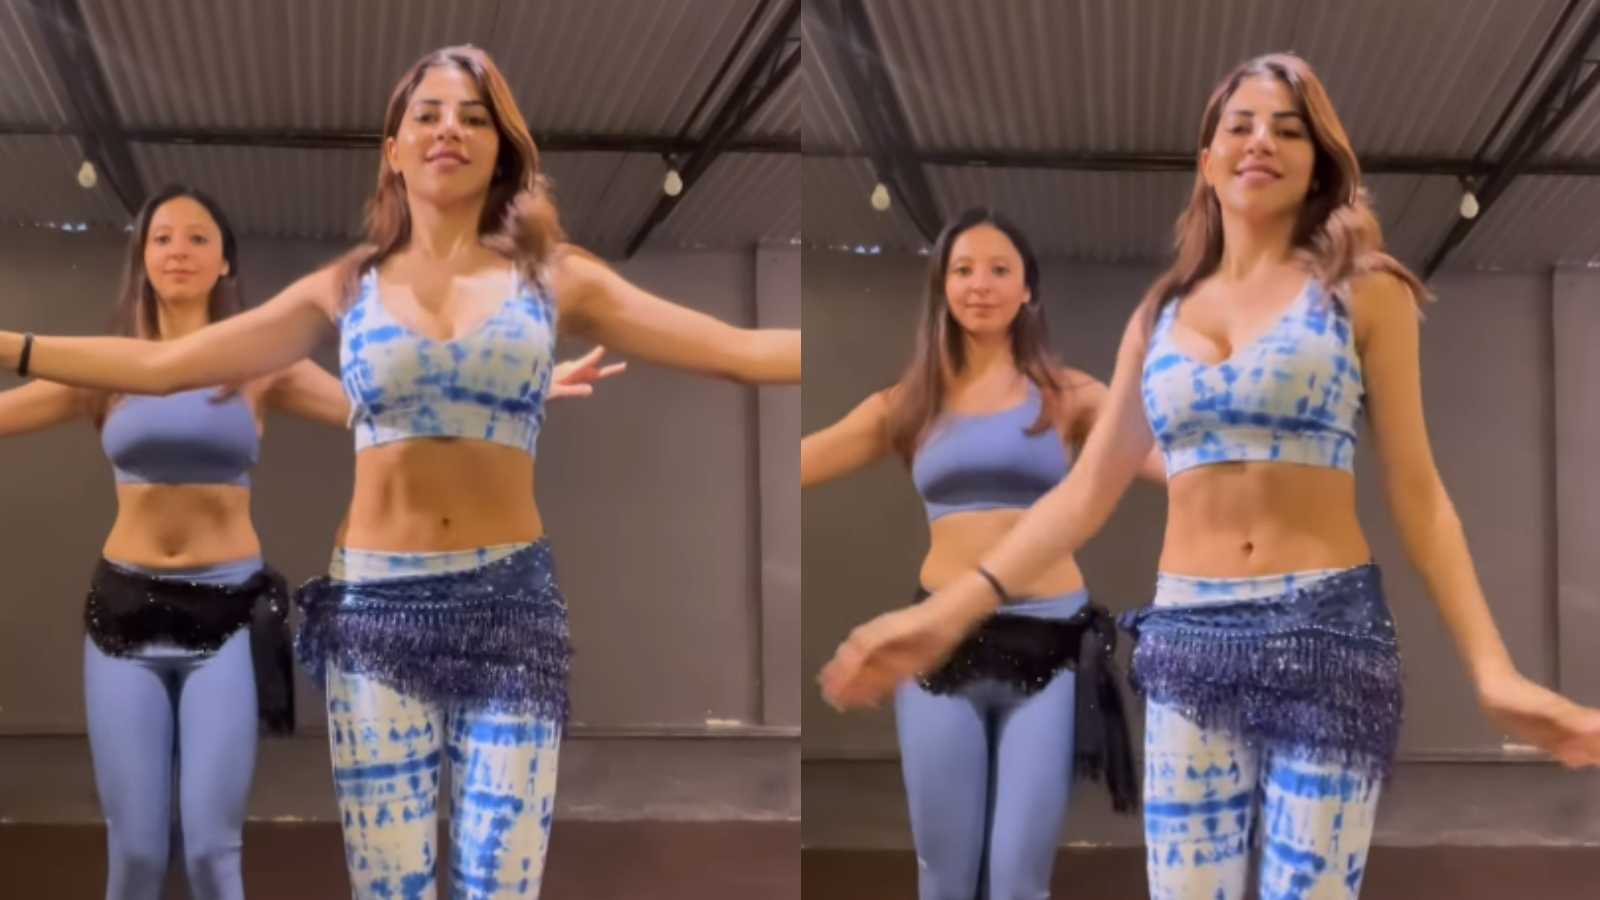 Jhalak Dikhla Jaa 10: Has Nikki Tamboli been learning belly dancing in preparation for the show?